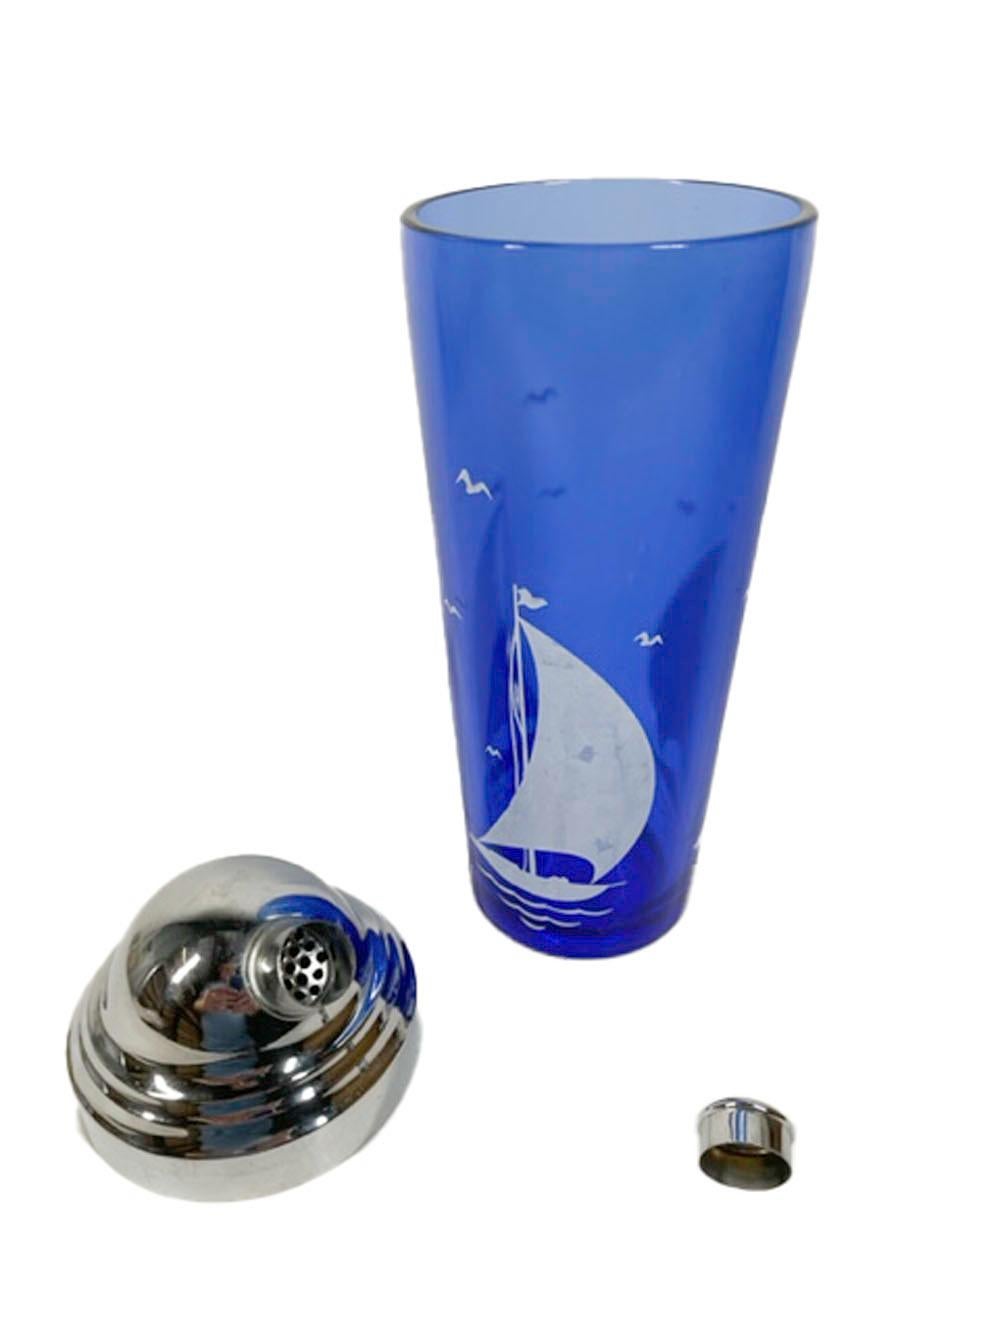 American Art Deco, Hazel-Atlas Cocktail Shaker with White Sailboat on Cobalt Glass For Sale